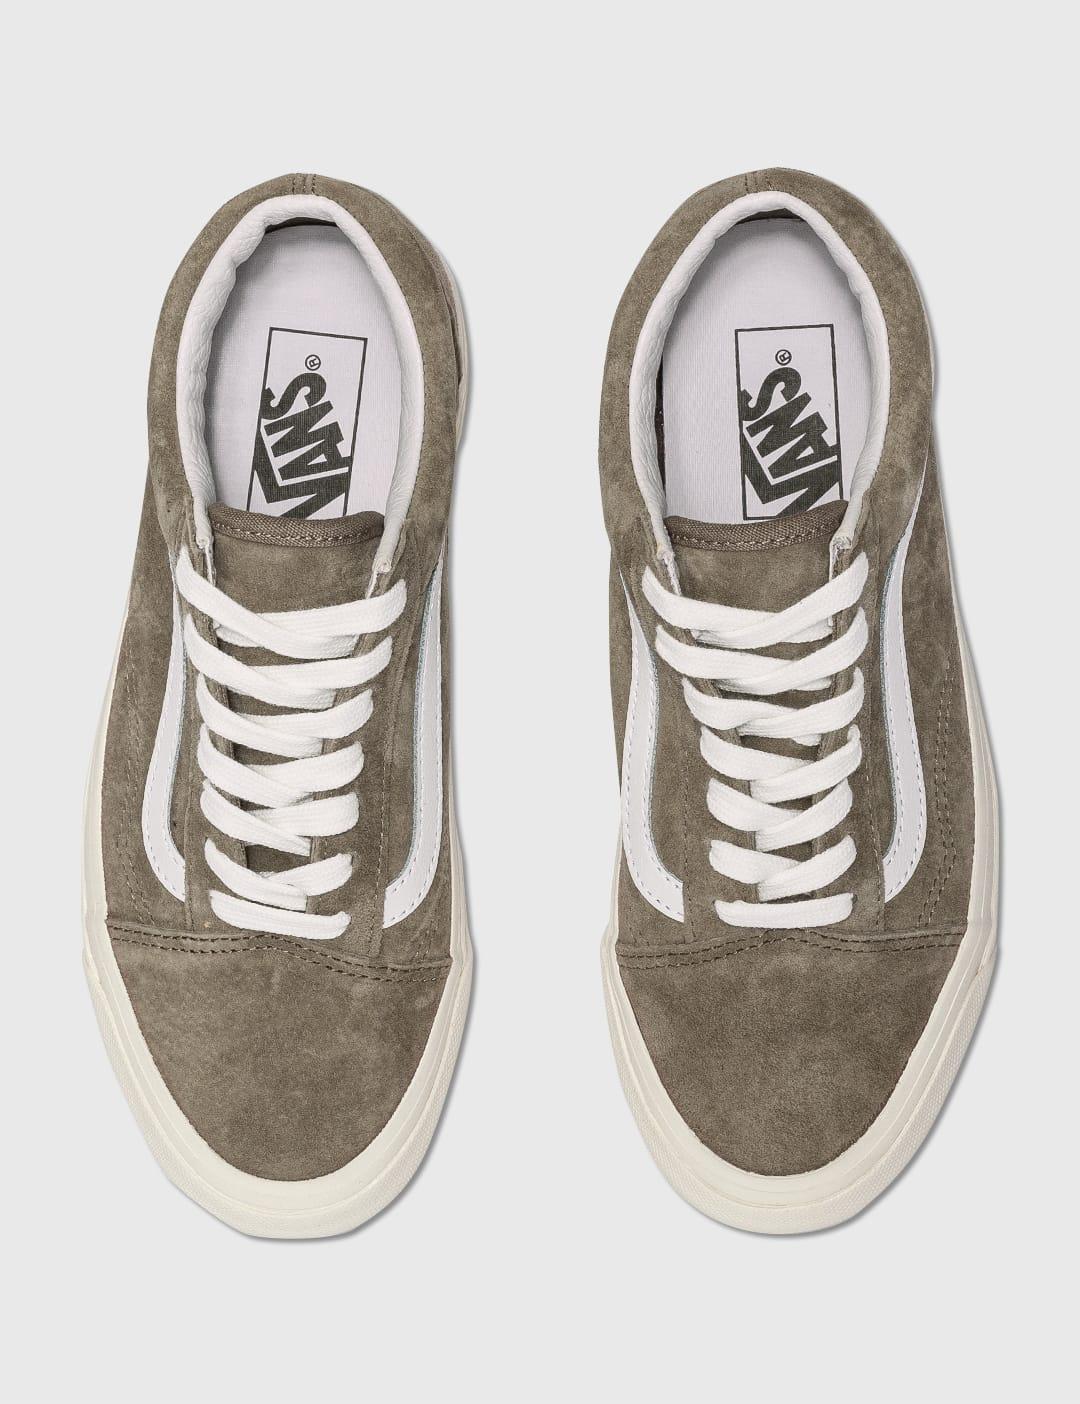 Anaheim Factory Old Skool 36 Dx Shoes in Brown Lyst